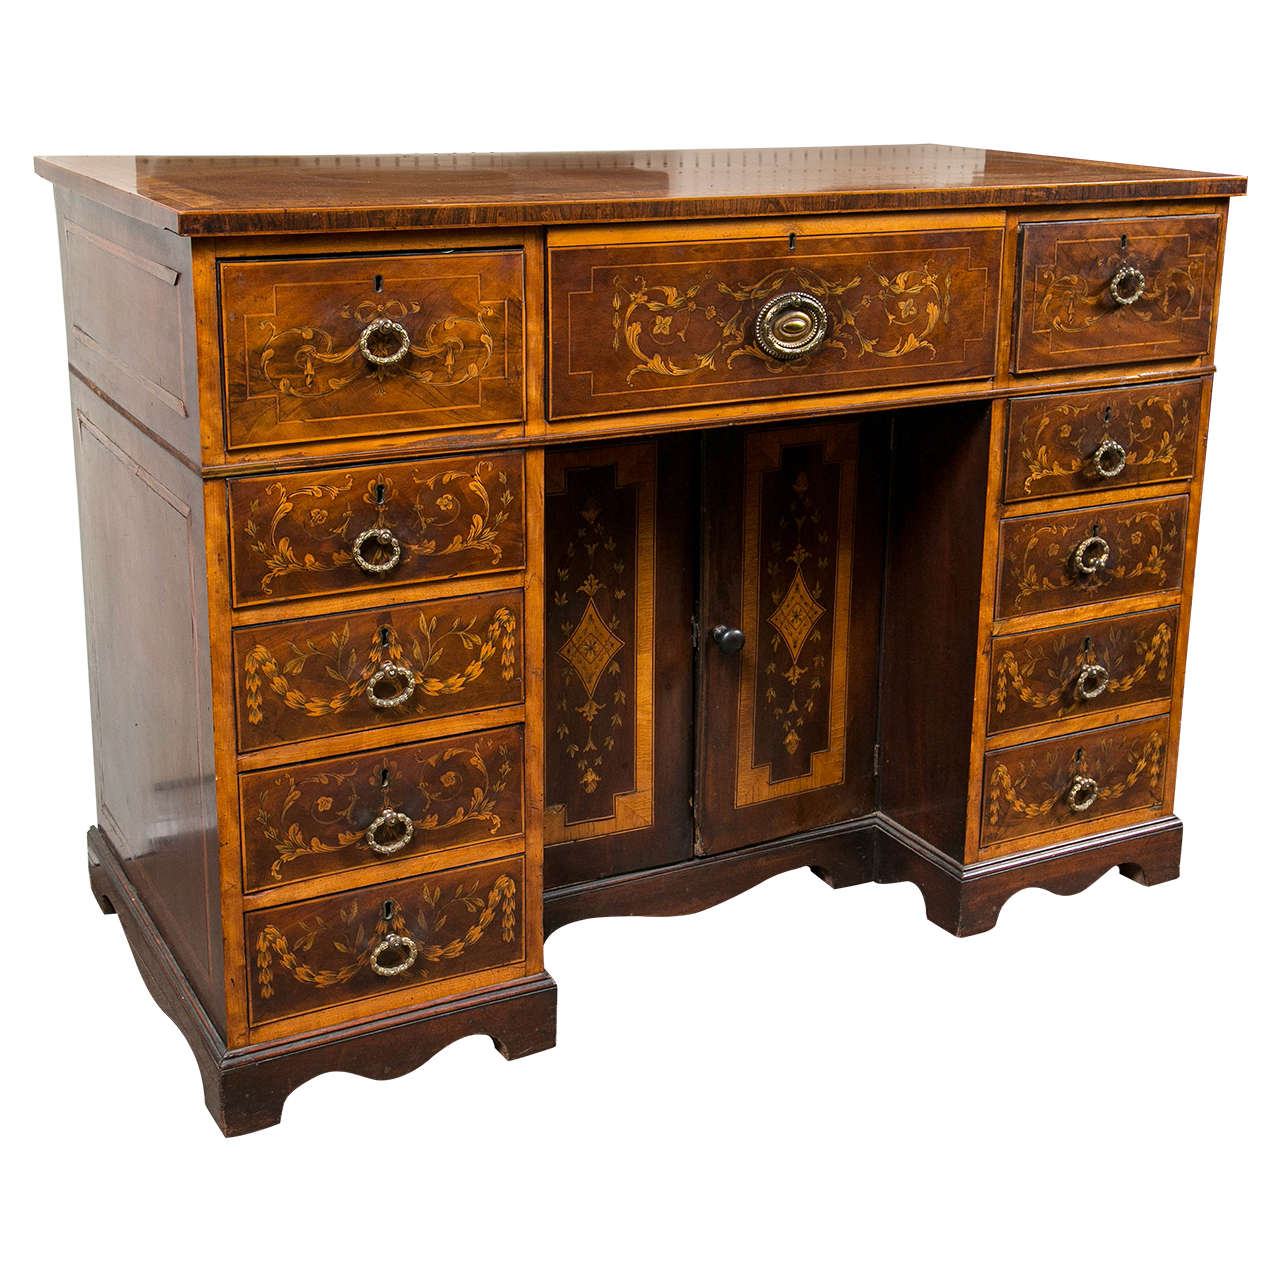 Inlaid and Pen Work Knee Hole Desk For Sale